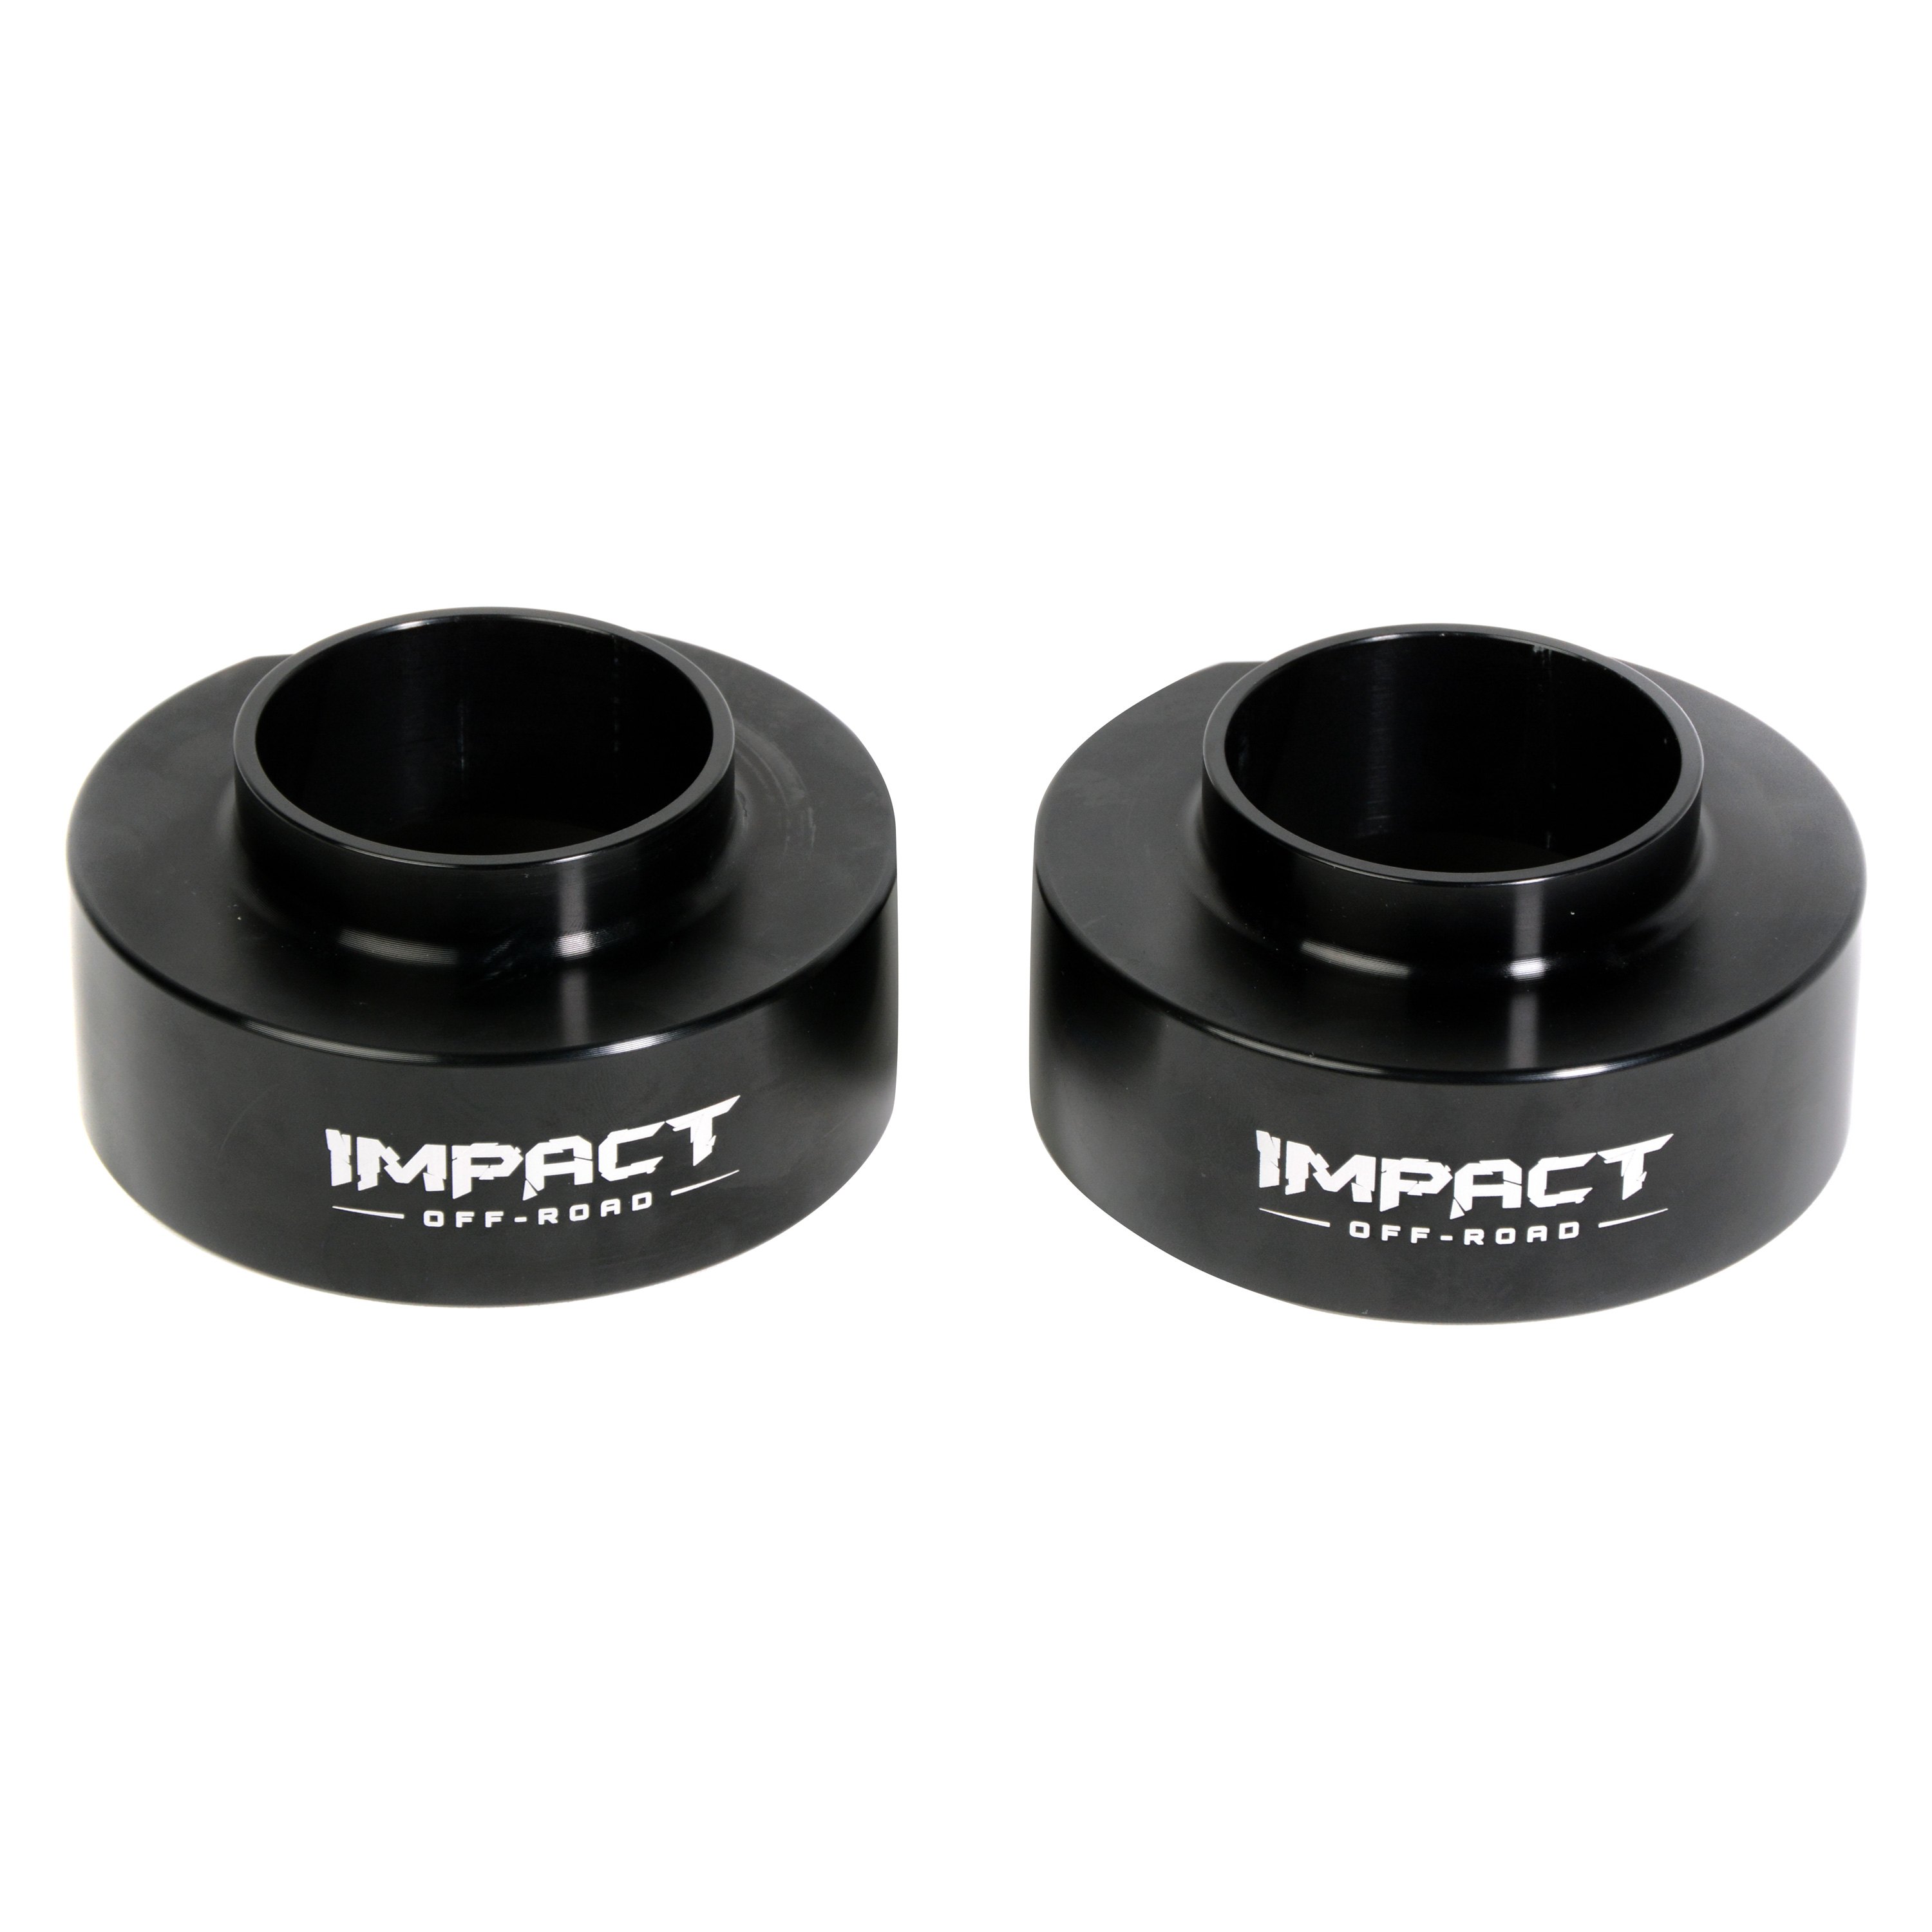 Impact Off Road Suspension® LK-801-J - 1.5 x 1.5 Front and Rear Leveling  Coil Spring Spacer Kit